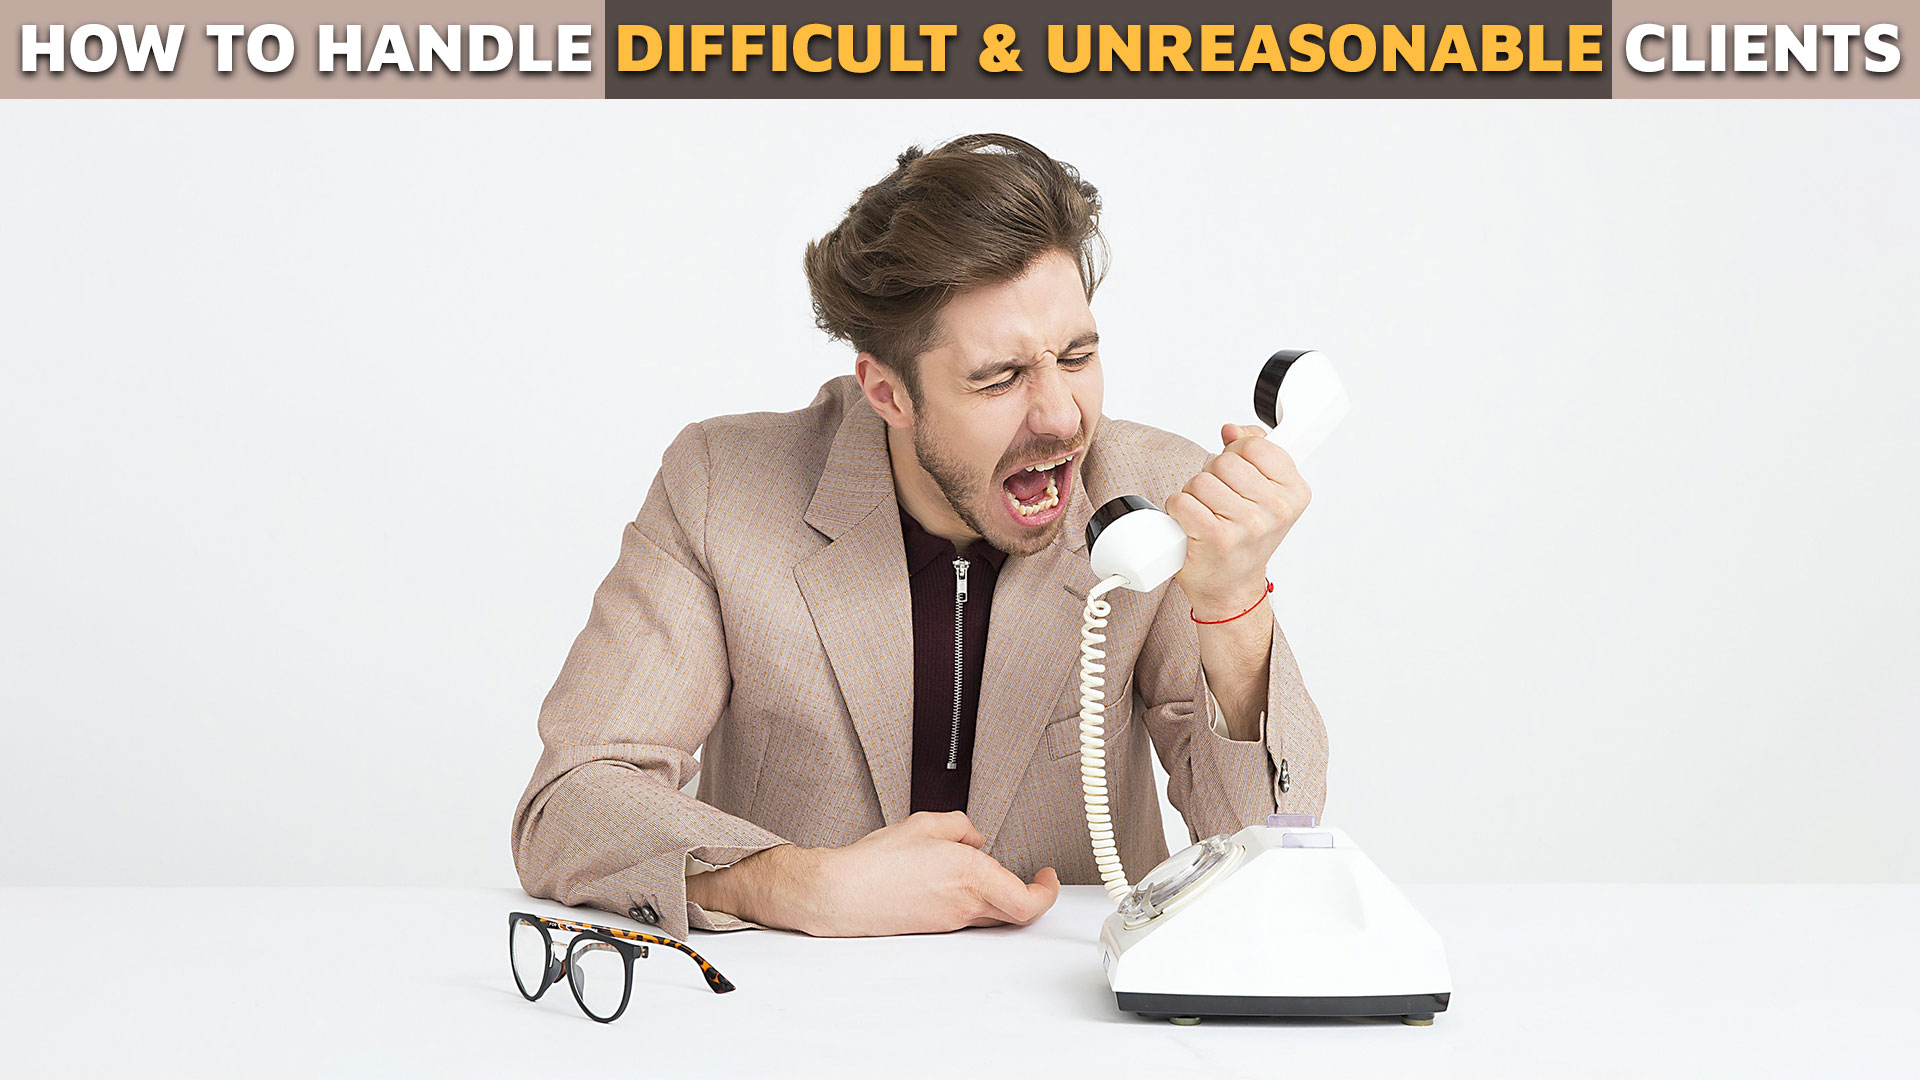 How to Handle Difficult & Unreasonable Clients